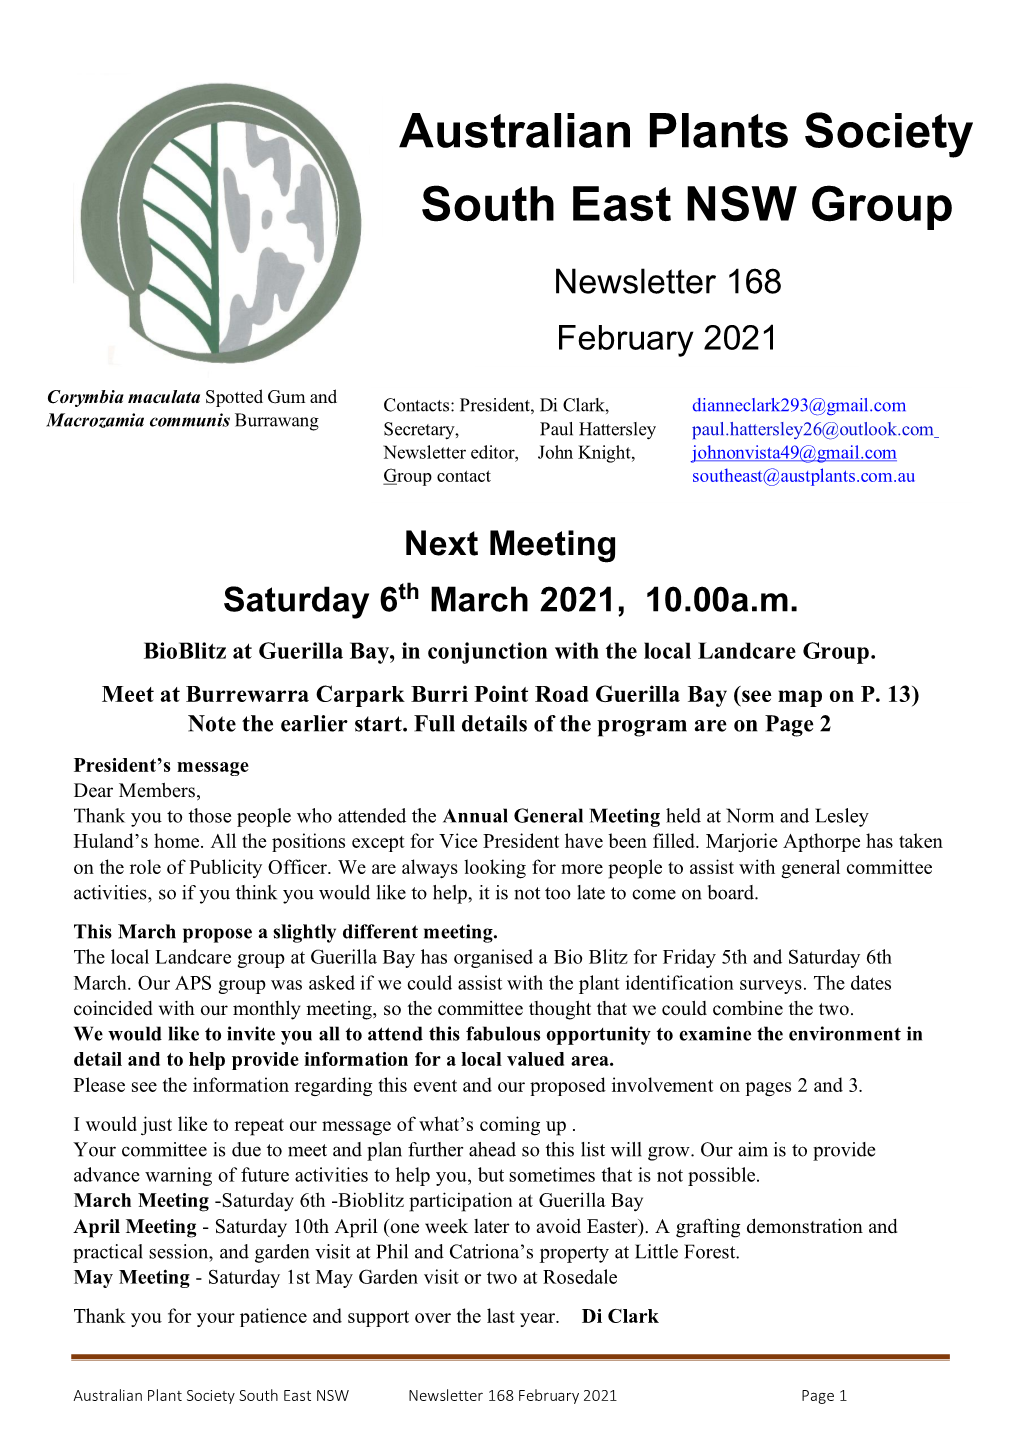 Australian Plants Society South East NSW Group